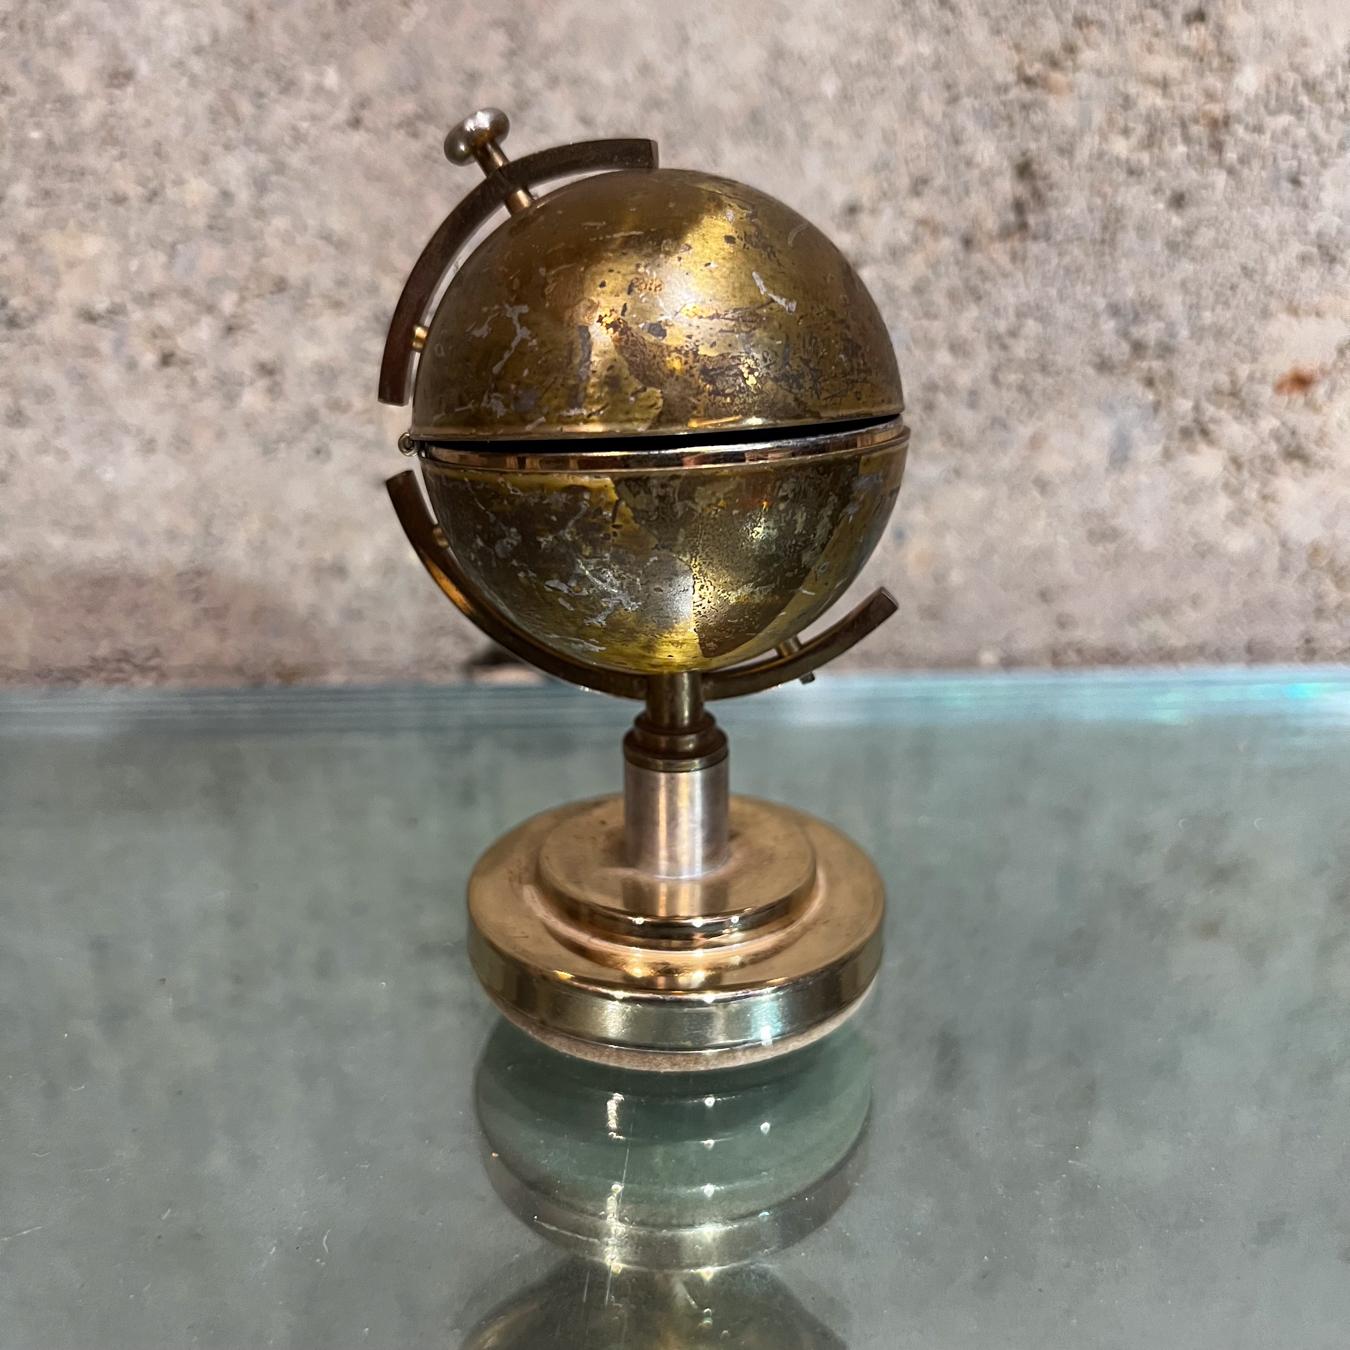 1960s World Globe Brass Cigarette Lighter Germany
4 h x 2.5 diameter
Original unrestored preowned vintage condition untested.
Fading.
See all images please.